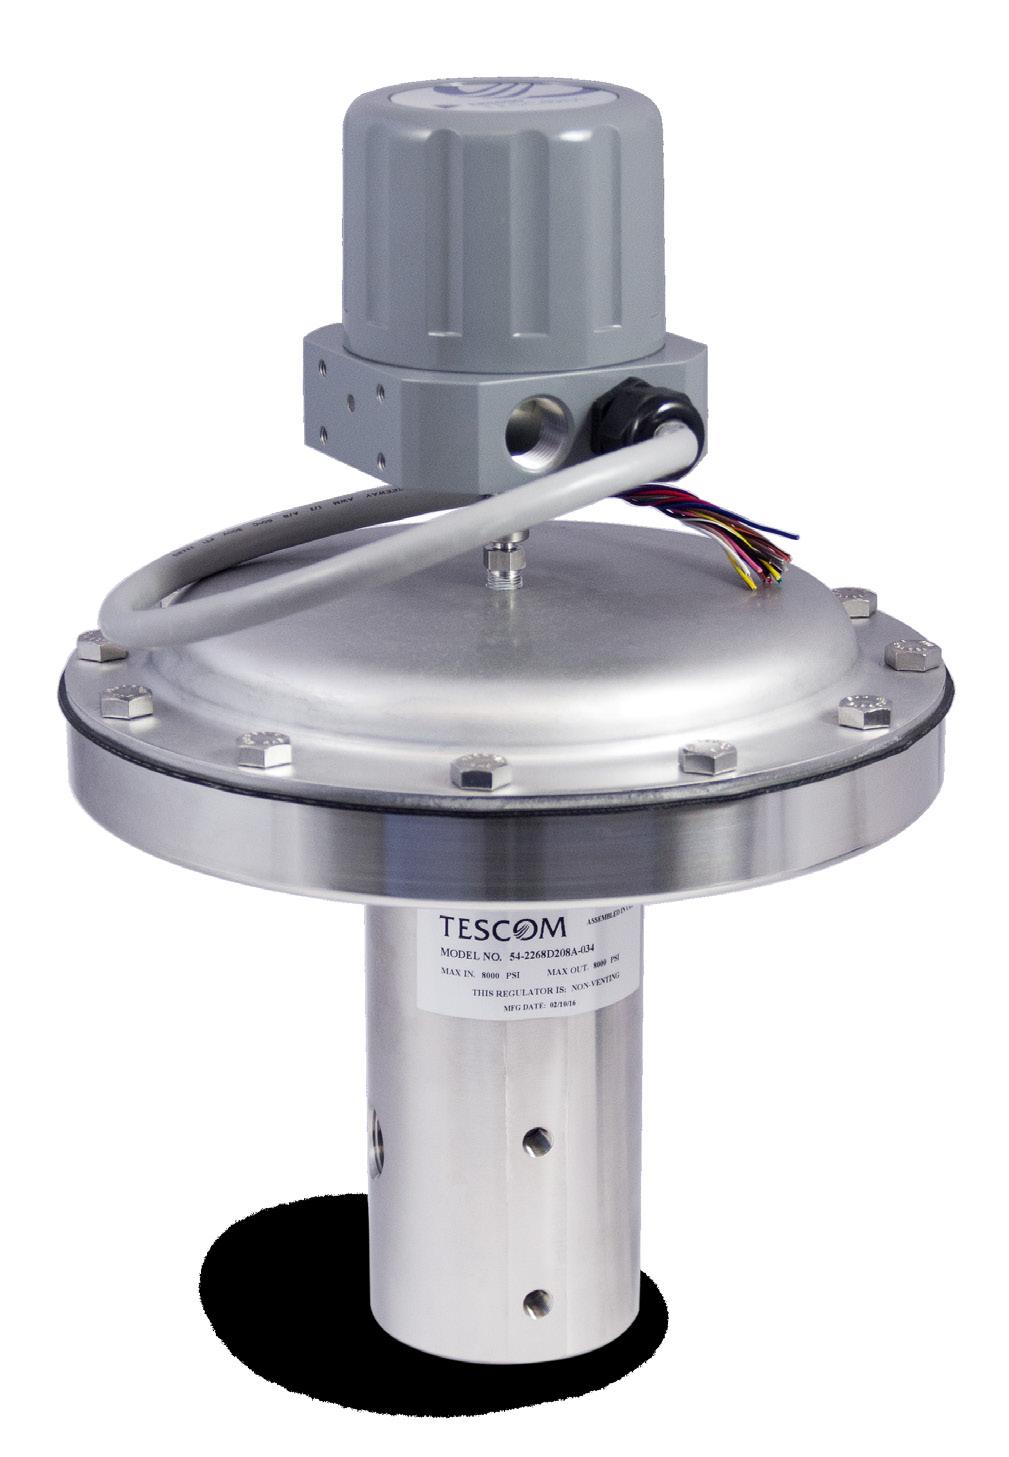 TESCOM 56 Series chemical injection flow control valve accurately delivers the optimal injection rate Product overview The TESCOM 56 Series chemical injection flow control valve utilizes an